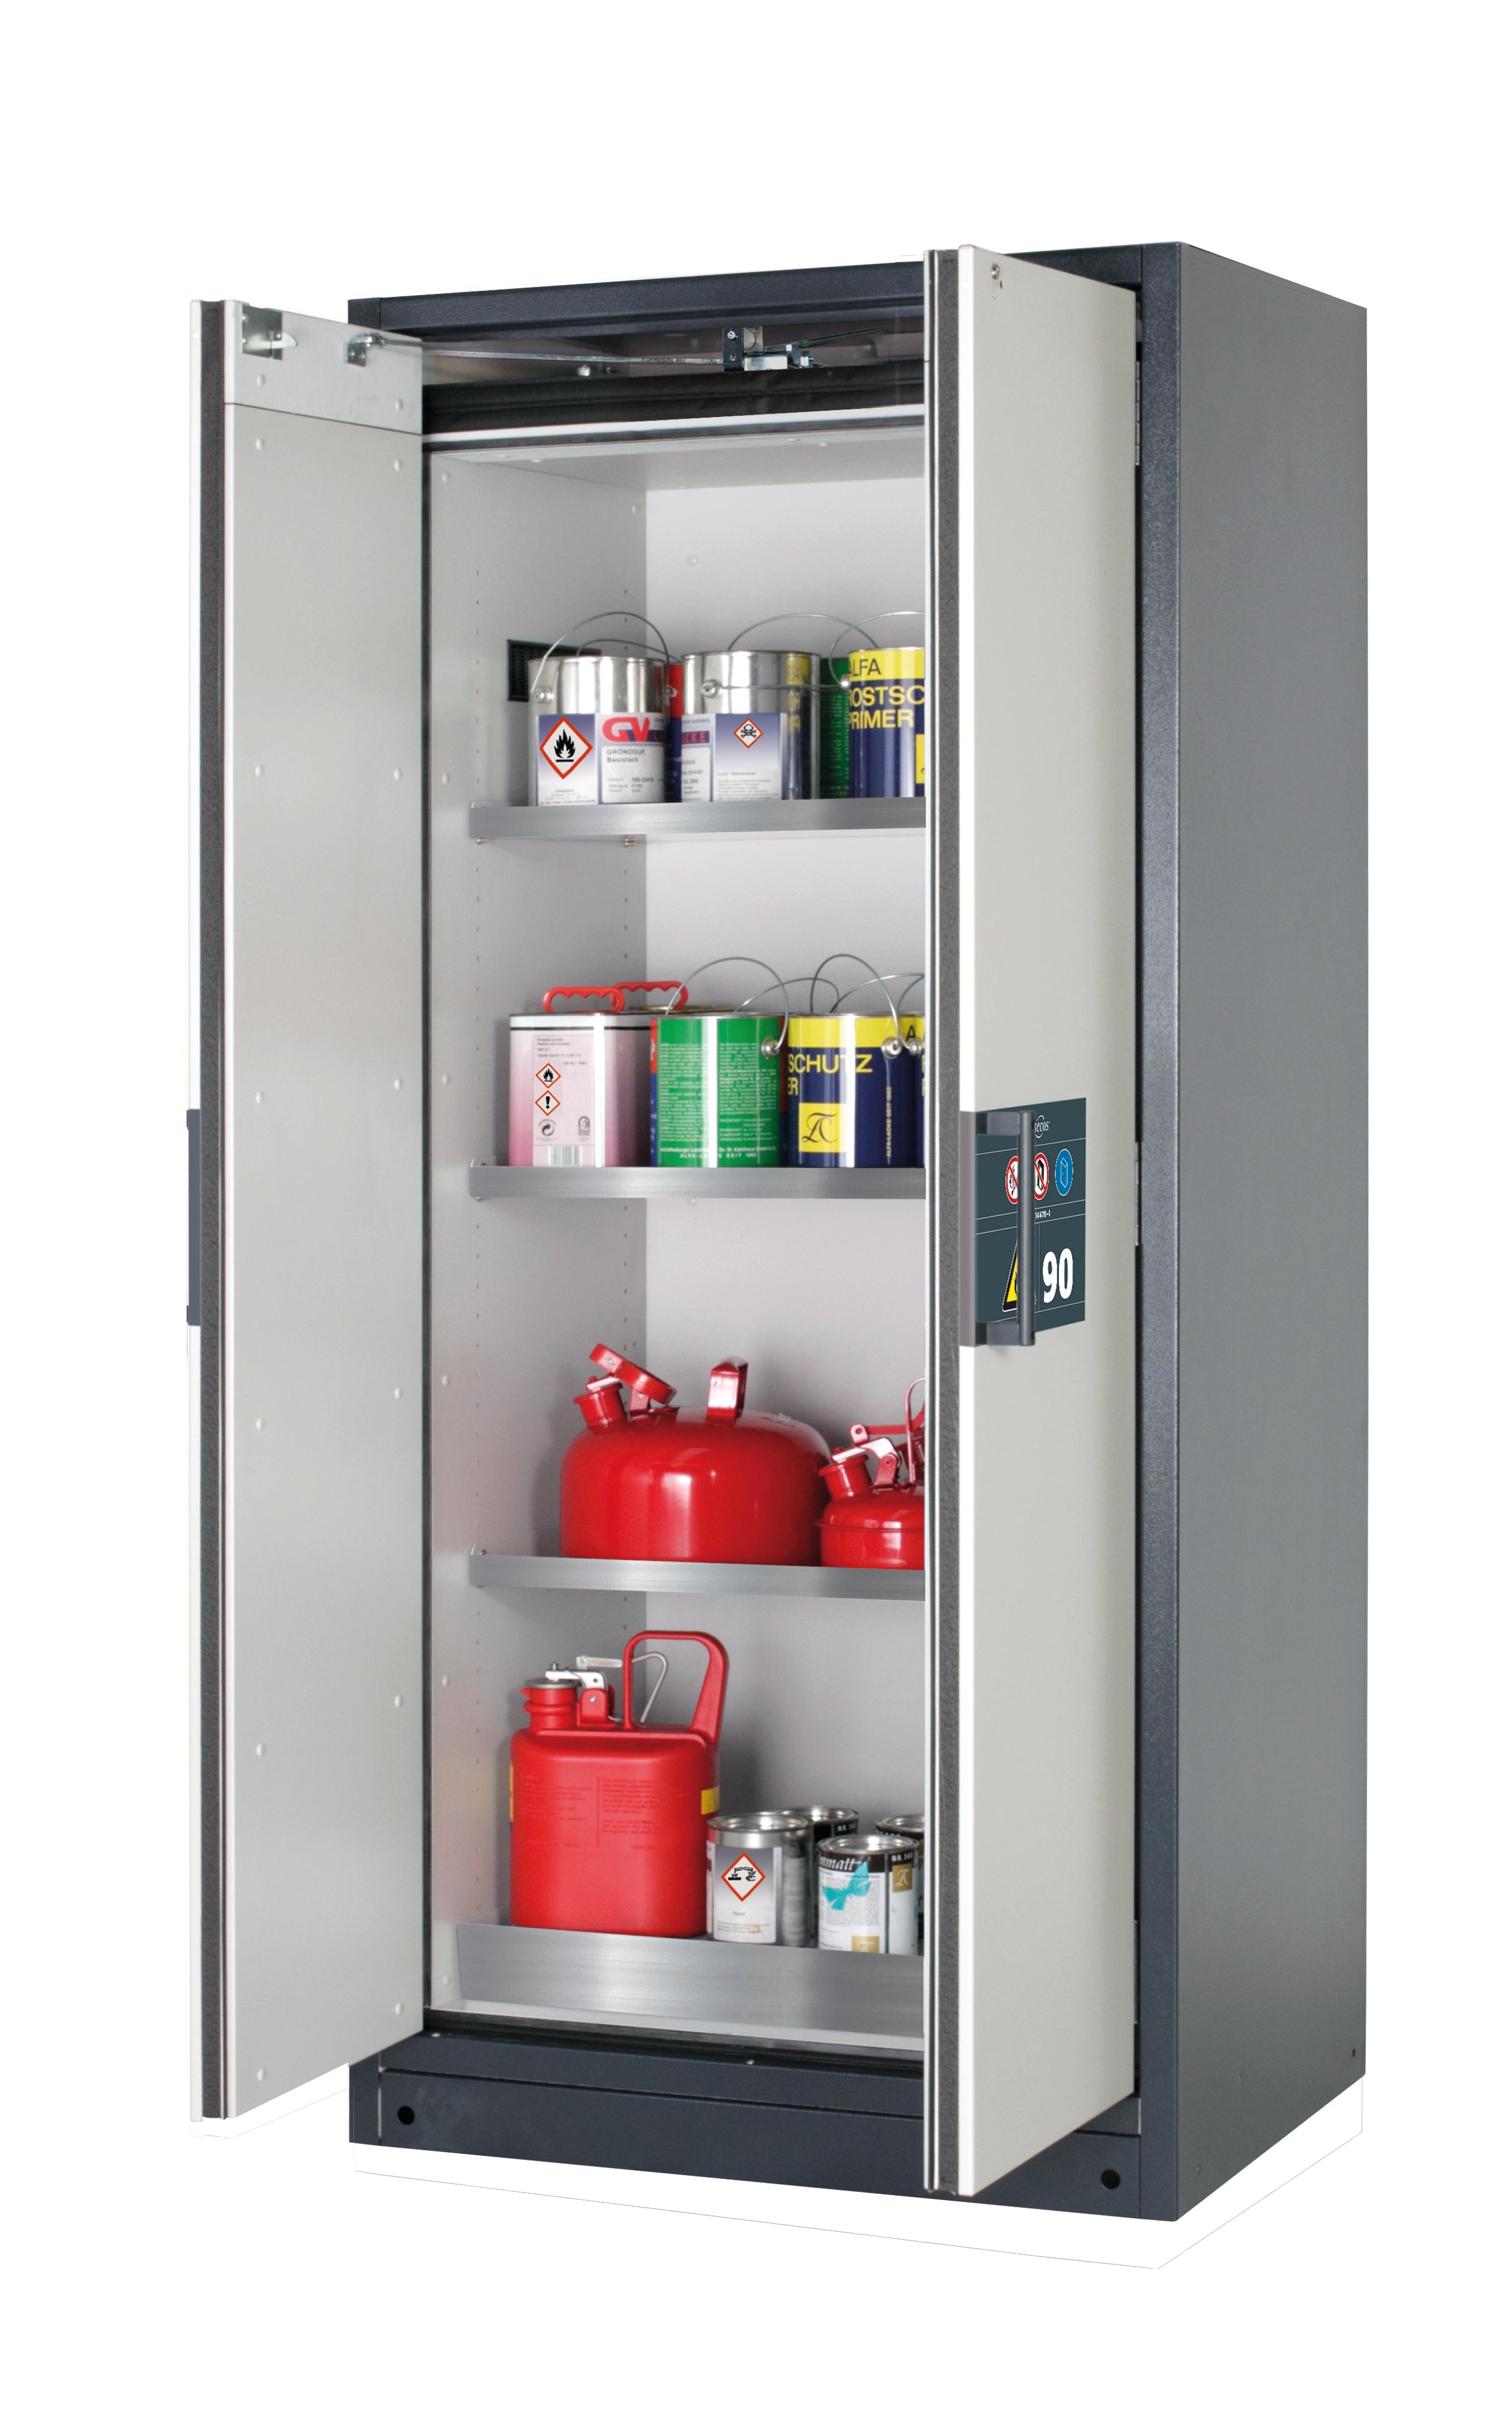 Type 90 safety storage cabinet Q-PEGASUS-90 model Q90.195.090.WDAC in light grey RAL 7035 with 3x shelf standard (stainless steel 1.4301),